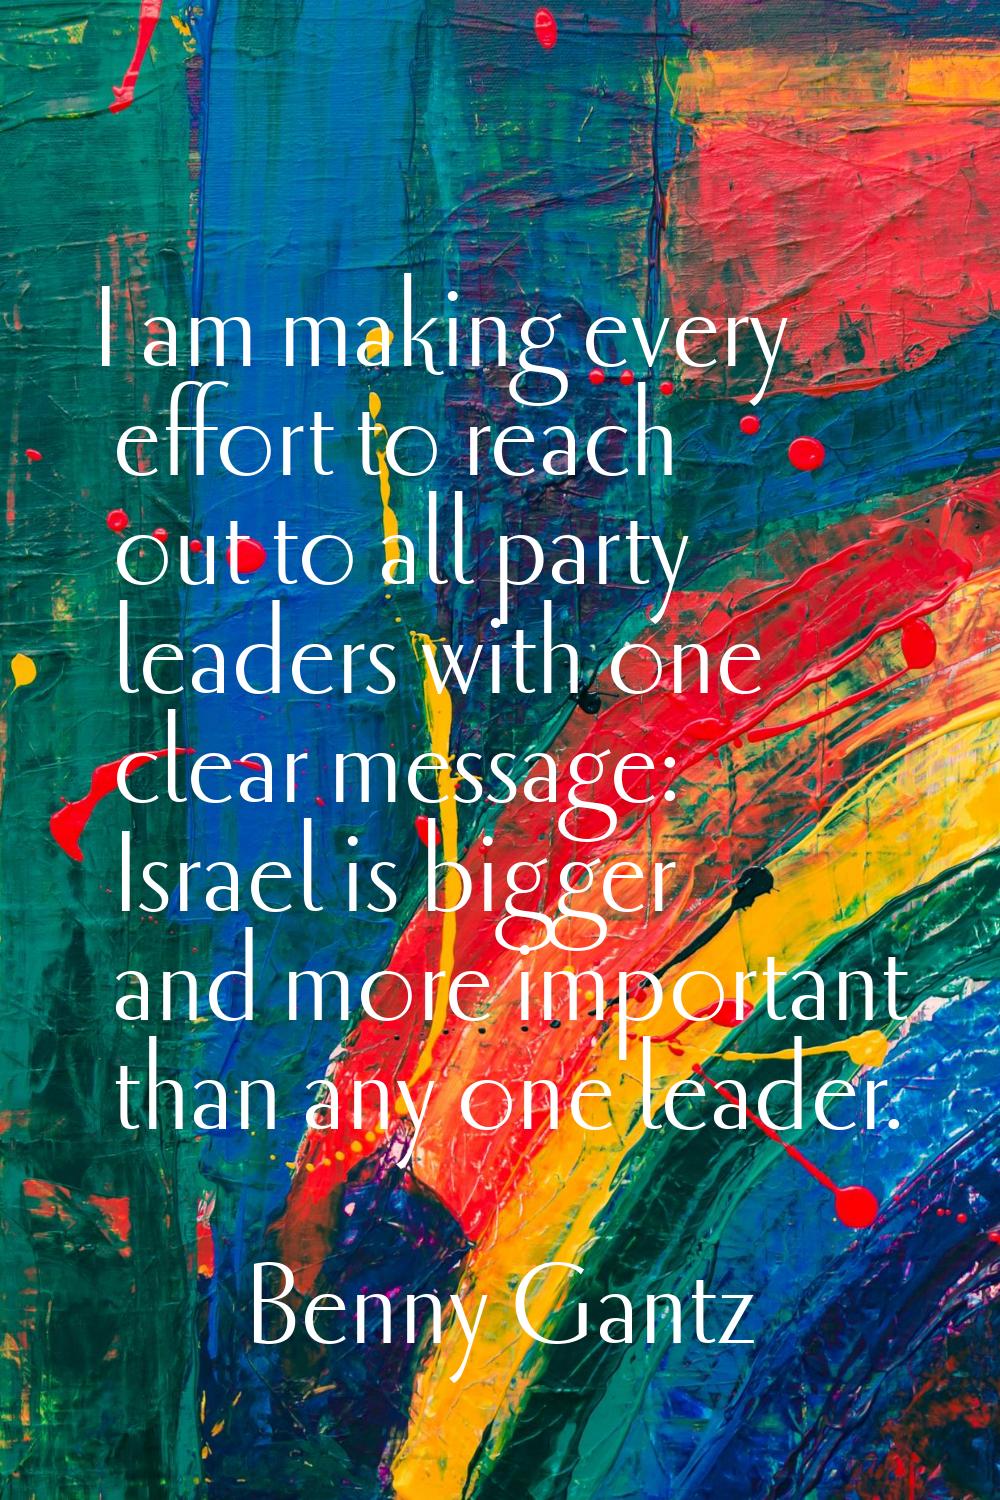 I am making every effort to reach out to all party leaders with one clear message: Israel is bigger